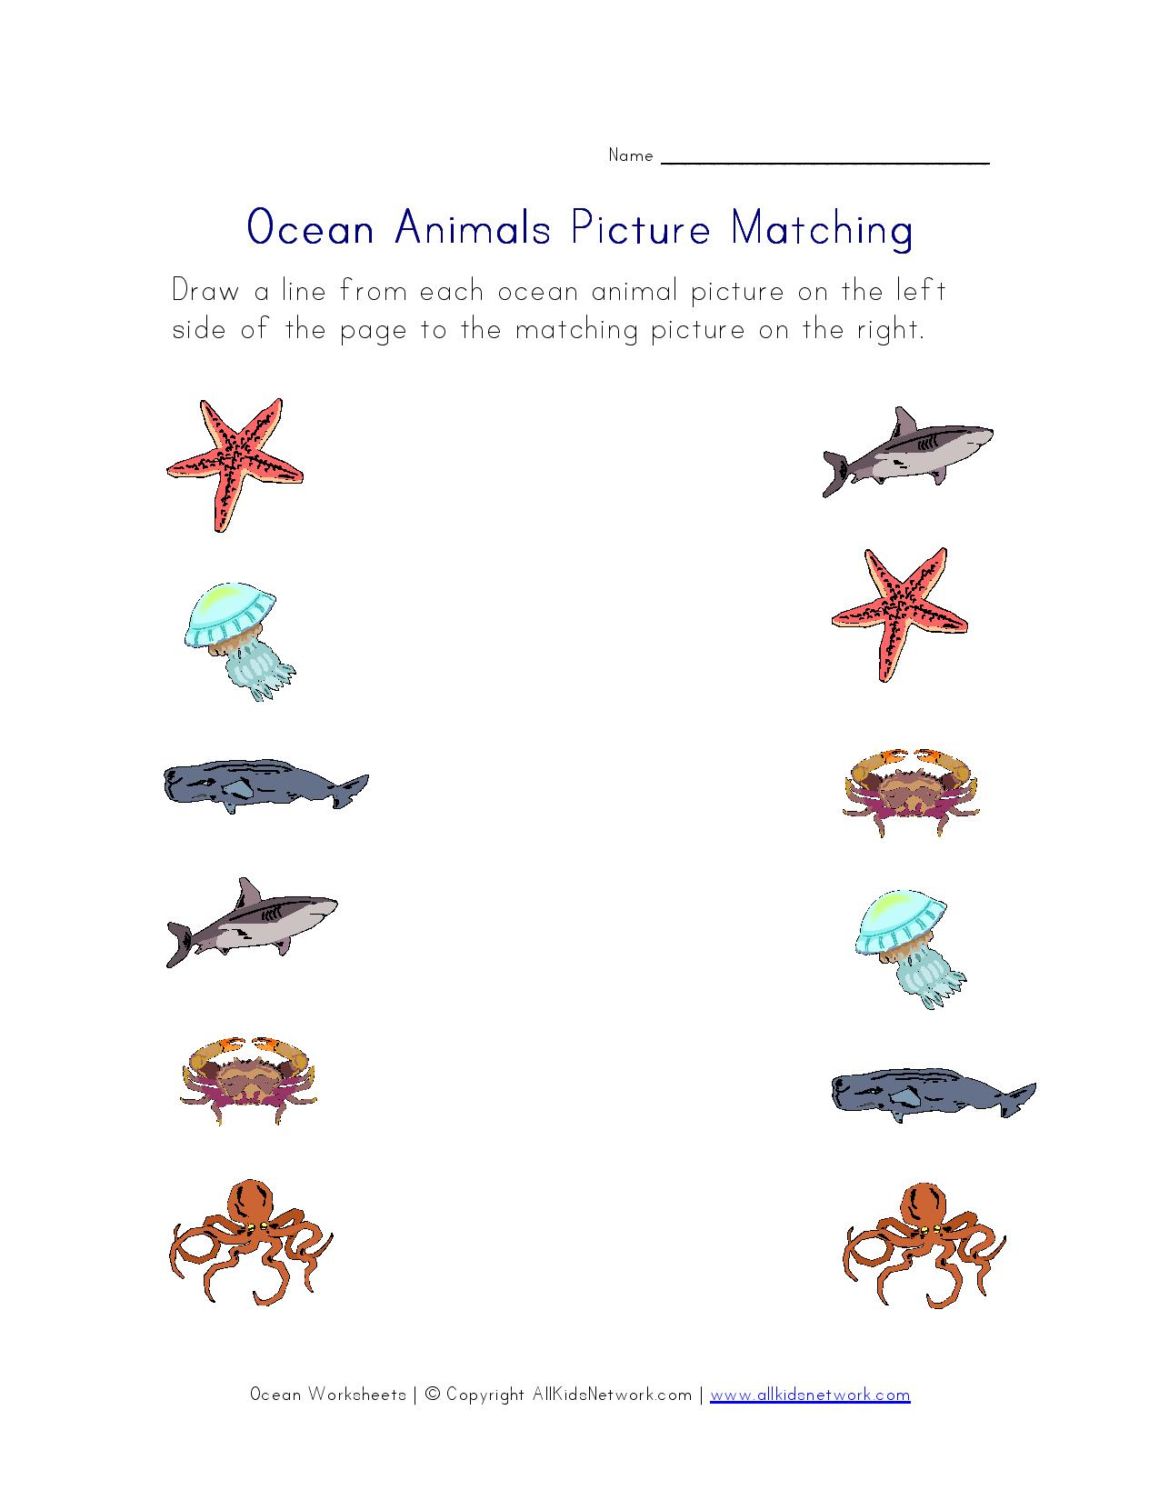 Activities and Worksheets for Preschoolers - Pacifica Beach Coalition